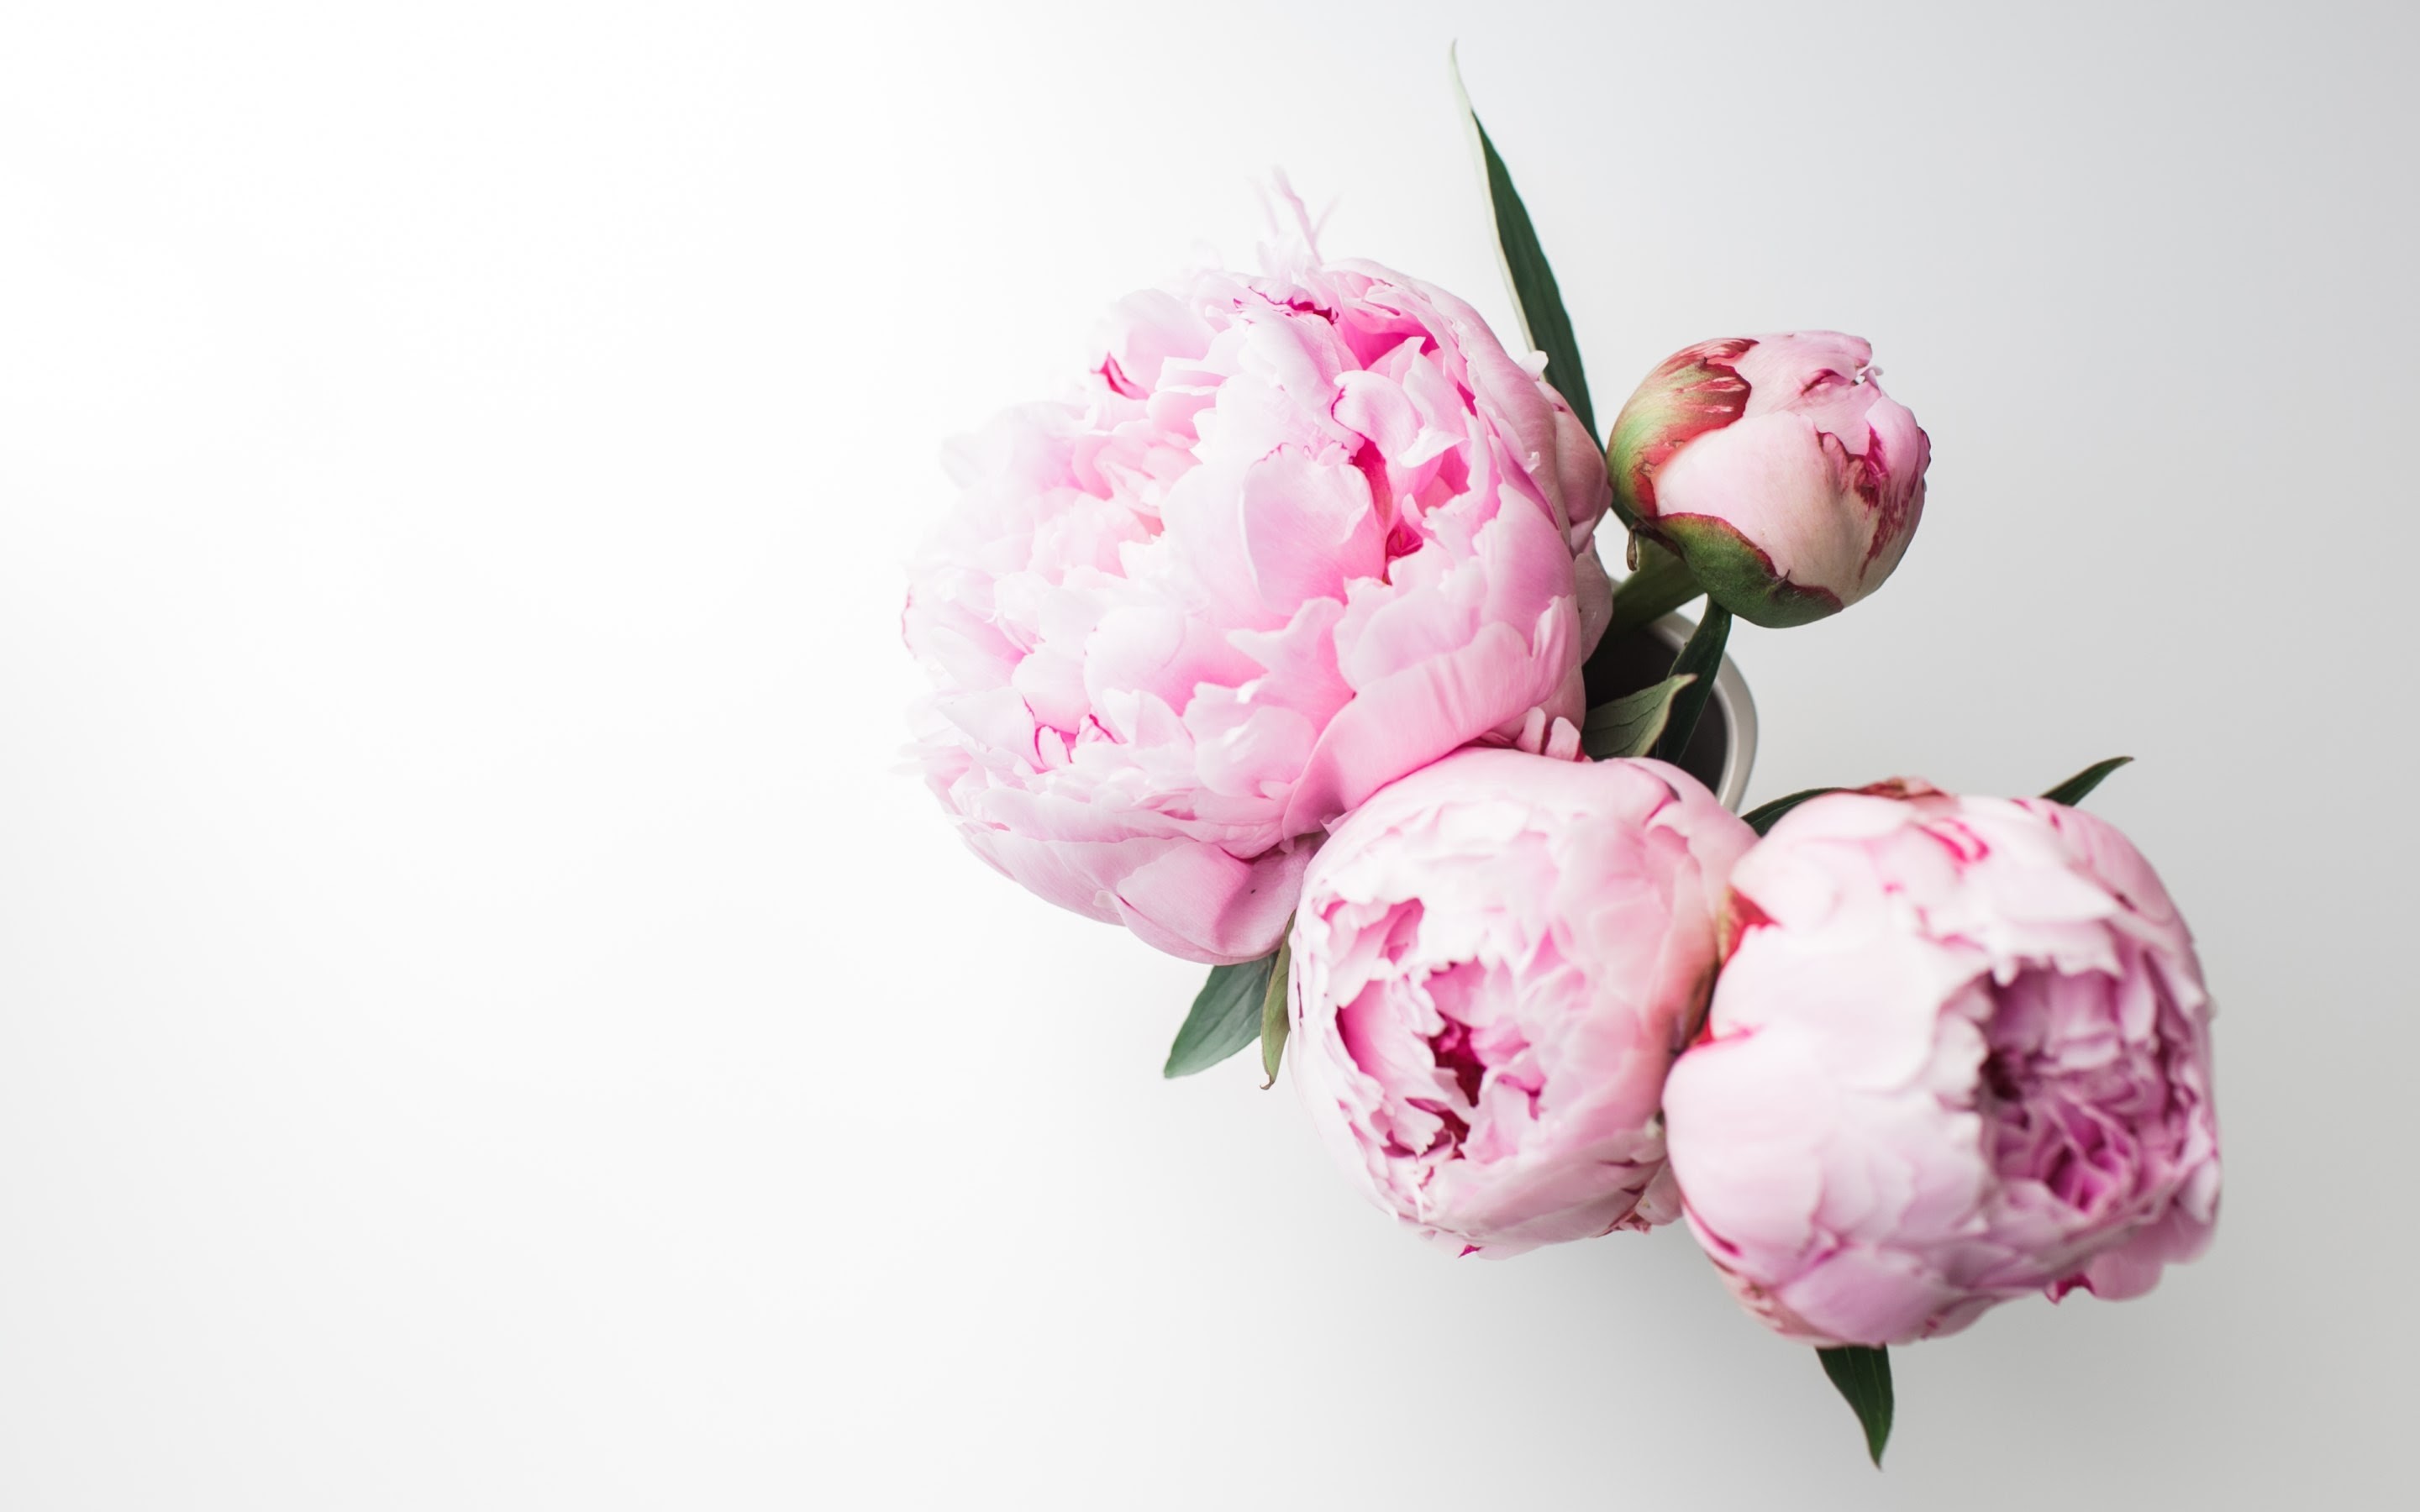 4K HD Wallpaper Bouquet of Peonies By Andreea with a Canon EOS 5D Mark II